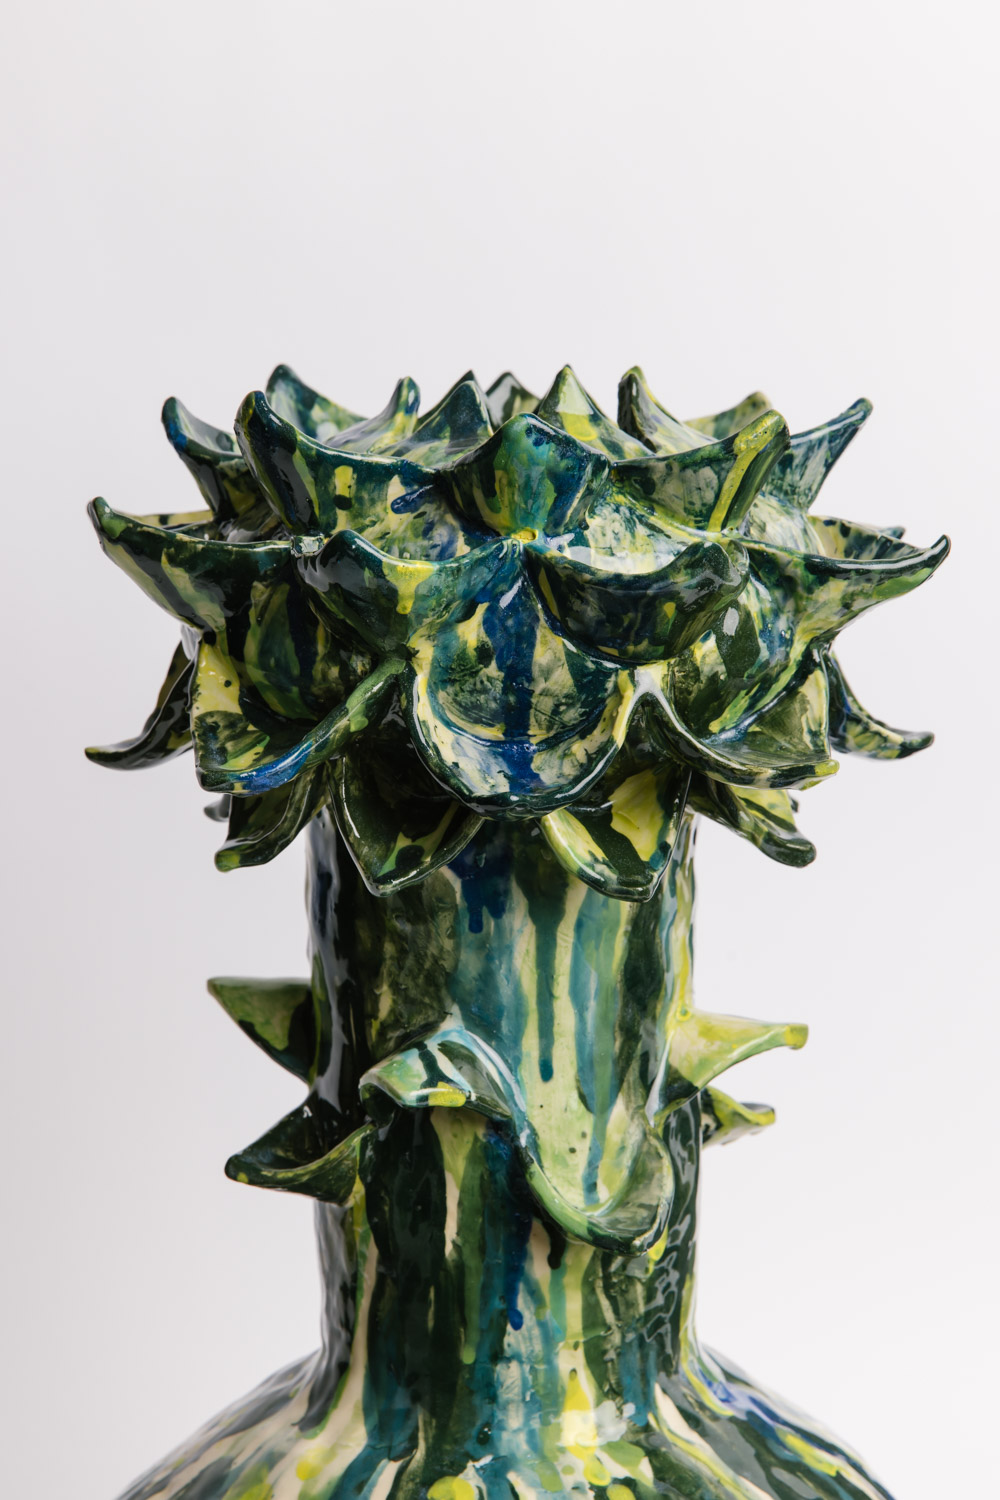 Detailed close up of large hand built ceramic vessel emulating a flower with dark green, yellow and blue painted underglazes, by Susan Buret, photo by Samee Lapham